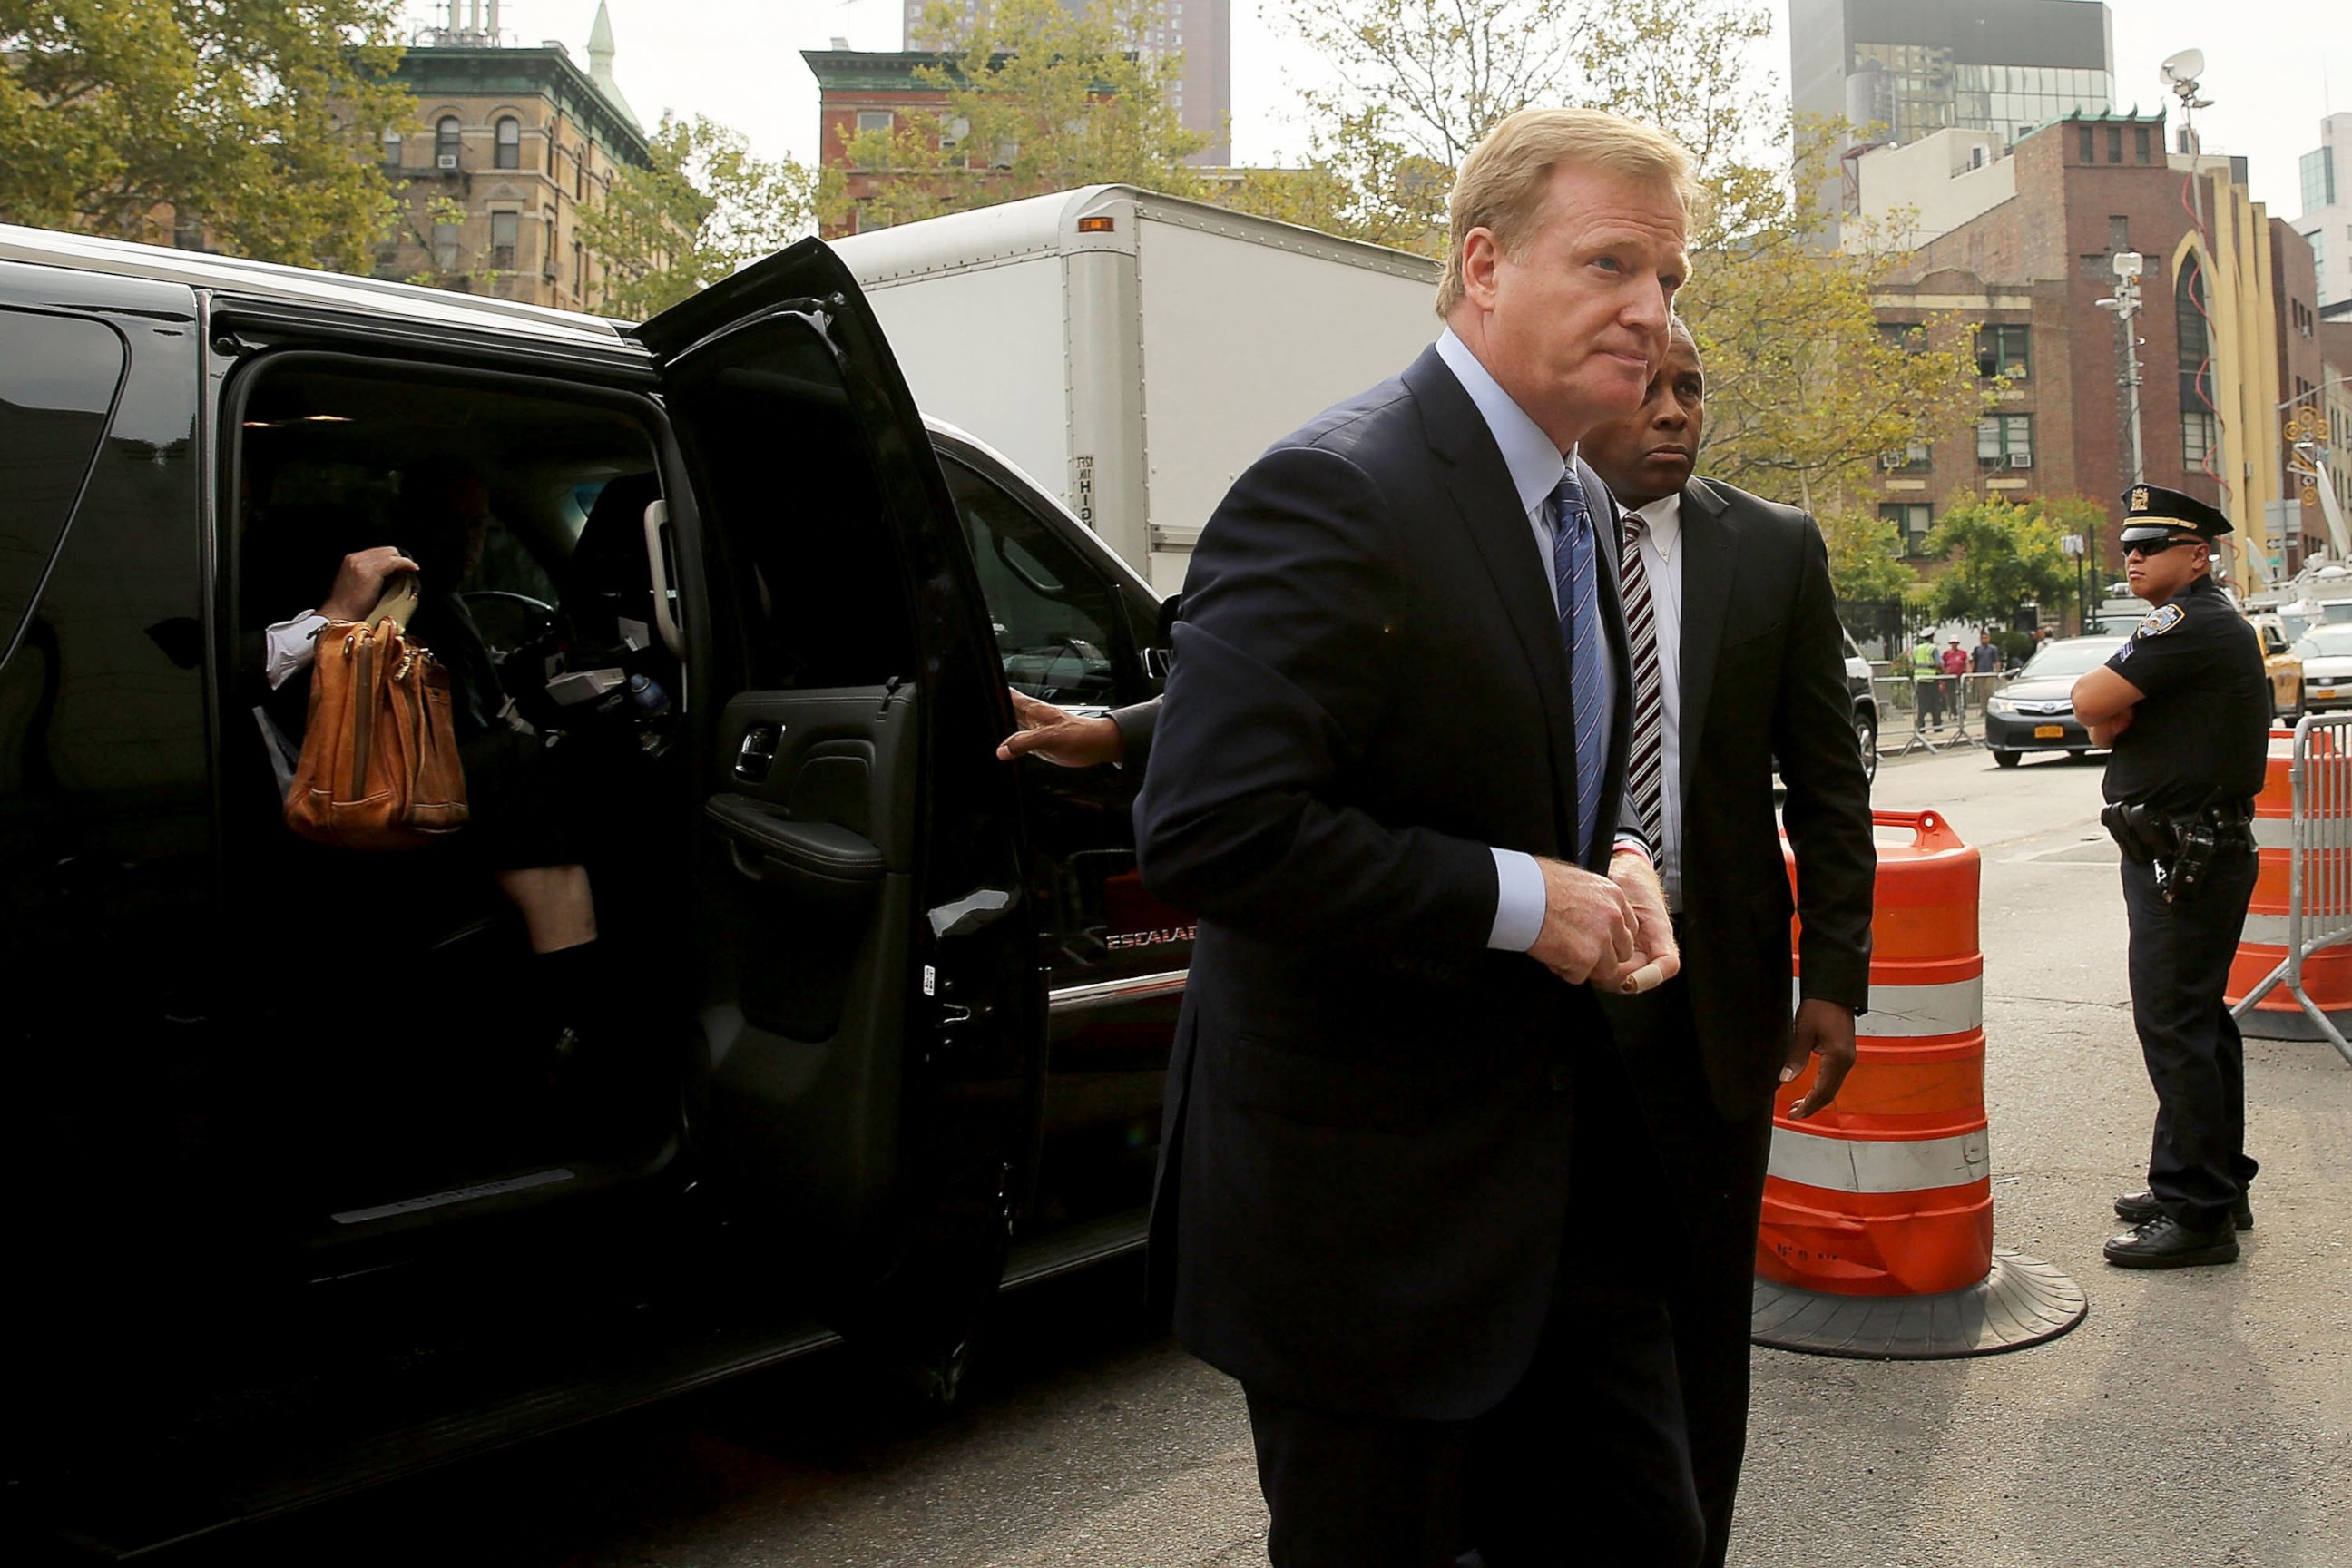 PHOTO: NFL Commissioner Roger Goodell arrives at federal court for a lawsuit over Quarterback Tom Brady of the New England Patriots' four game suspension, Aug. 31, 2015, in New York City.